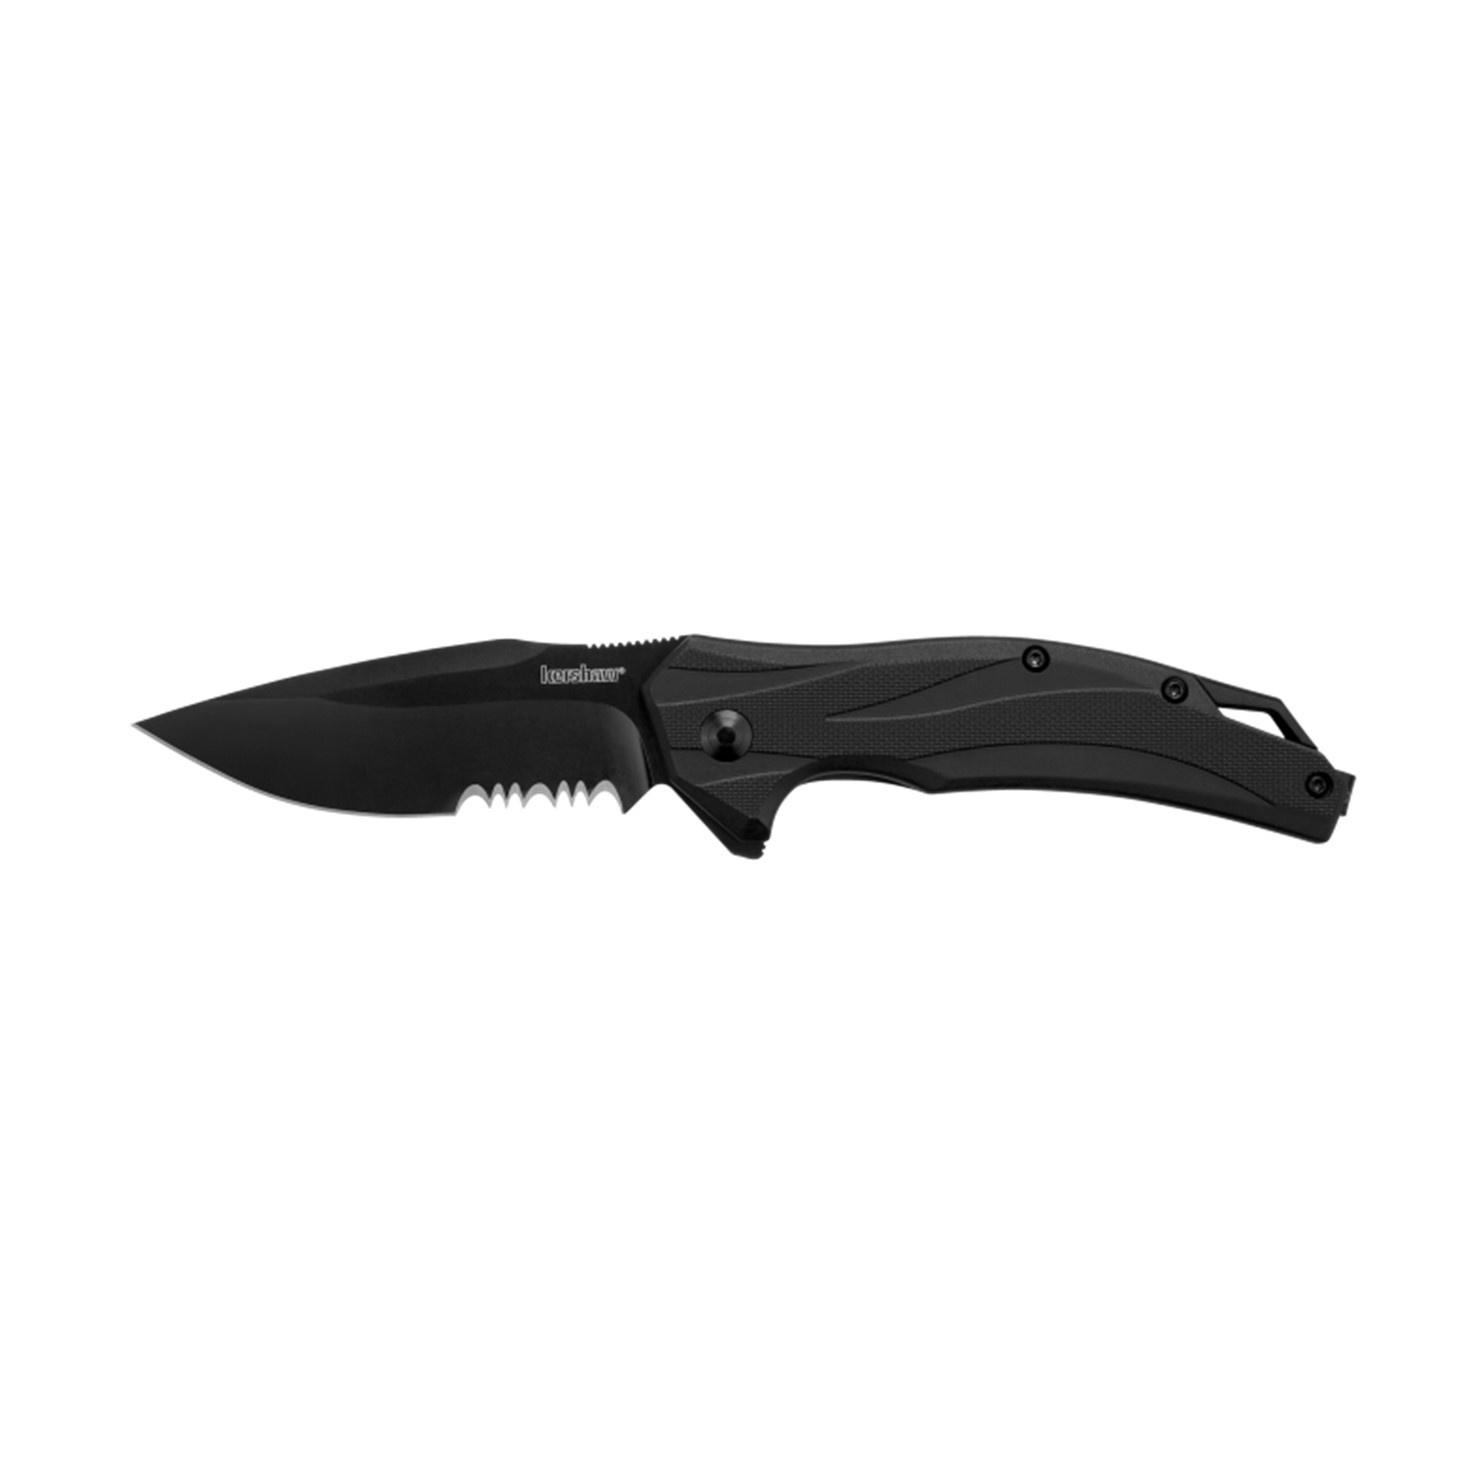 Kershaw Lateral Black Serrated